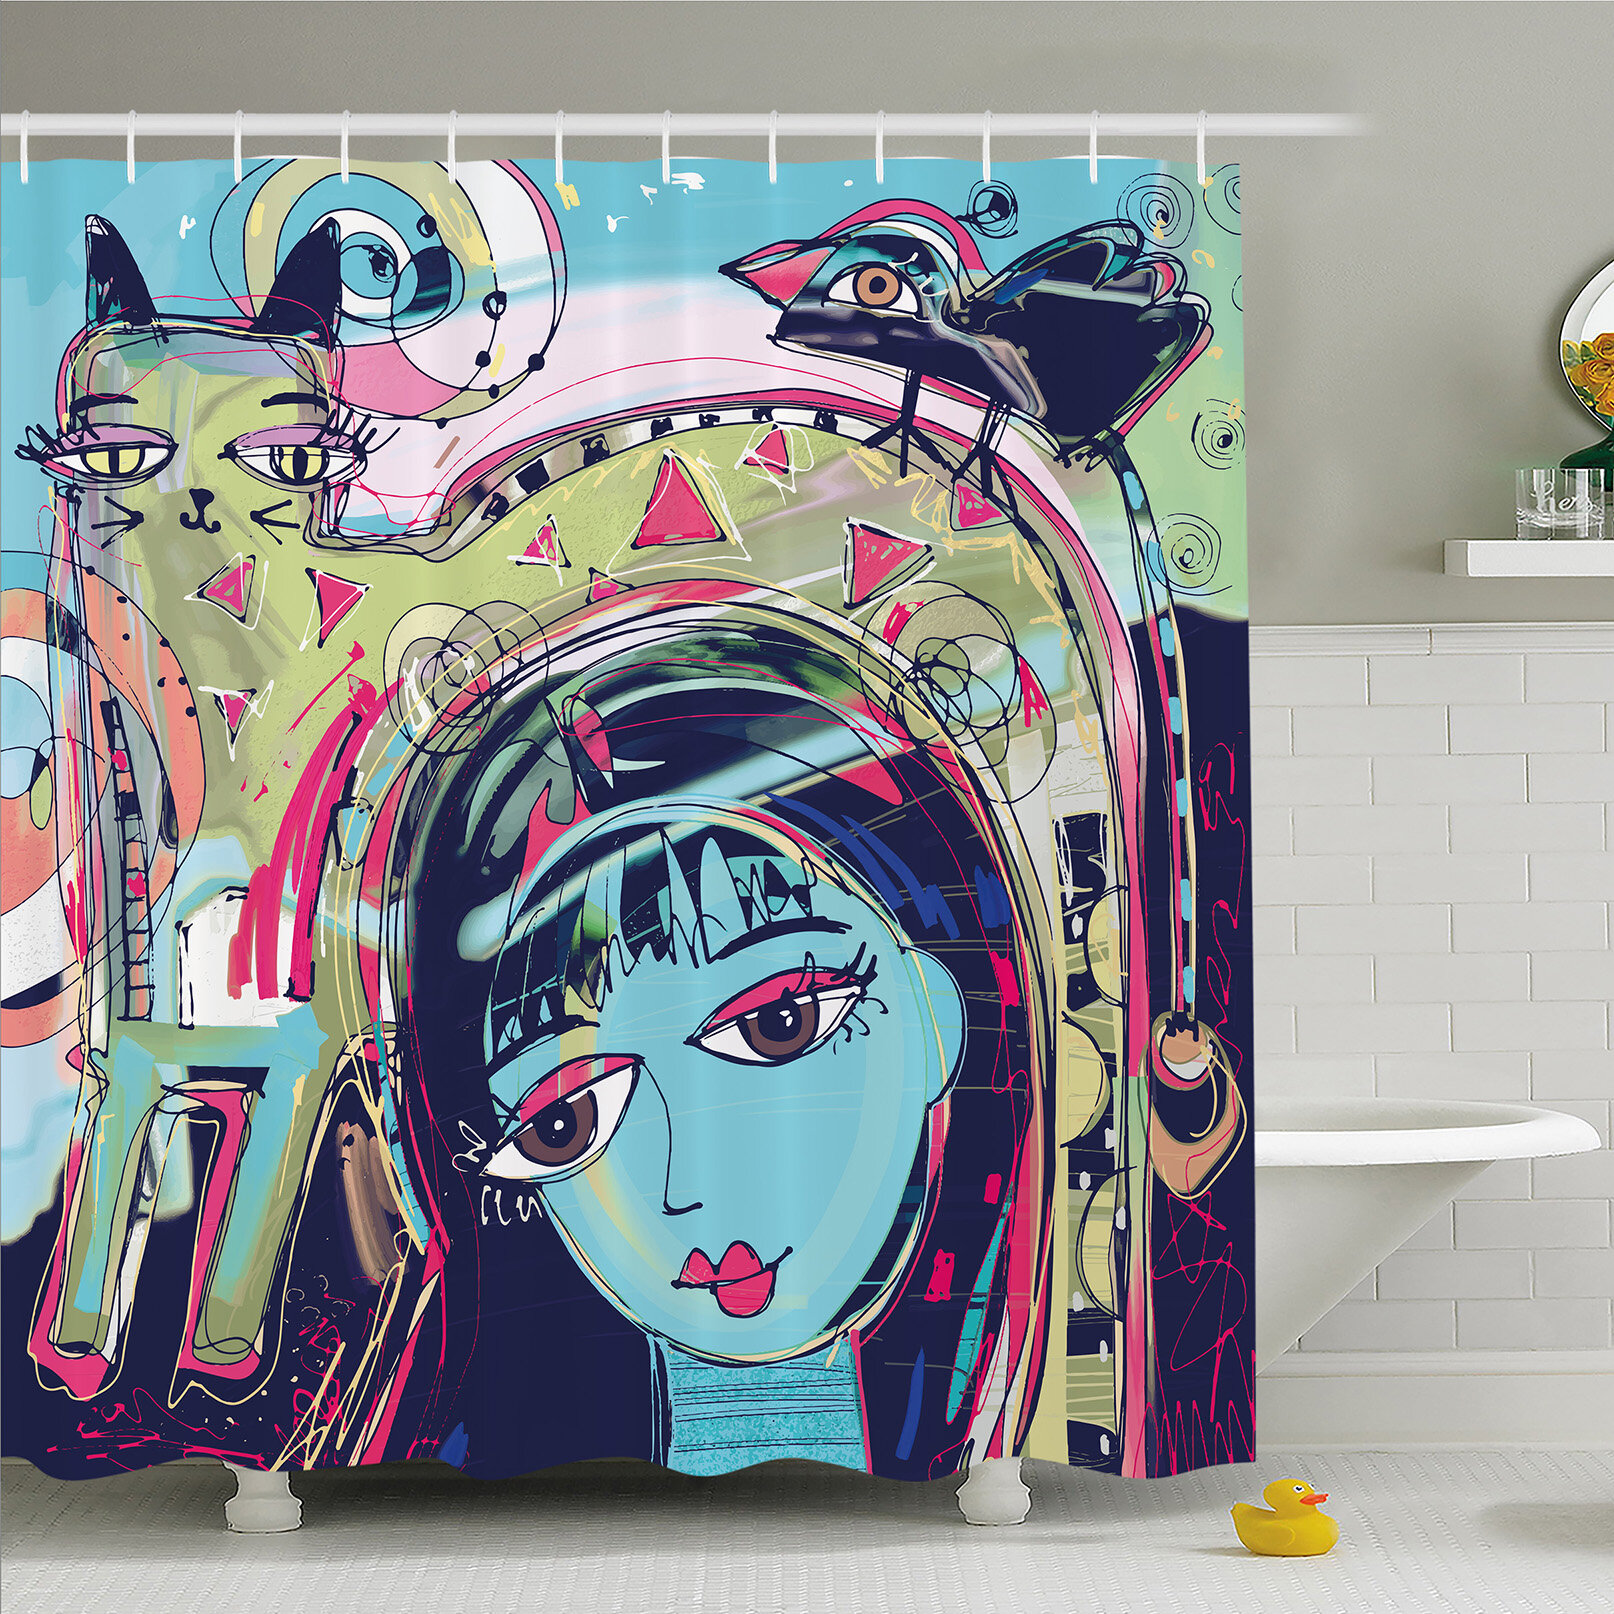 A Sketch Style Art Print Trendy Hipster New Age Urban Cat  Shower Curtain Set 